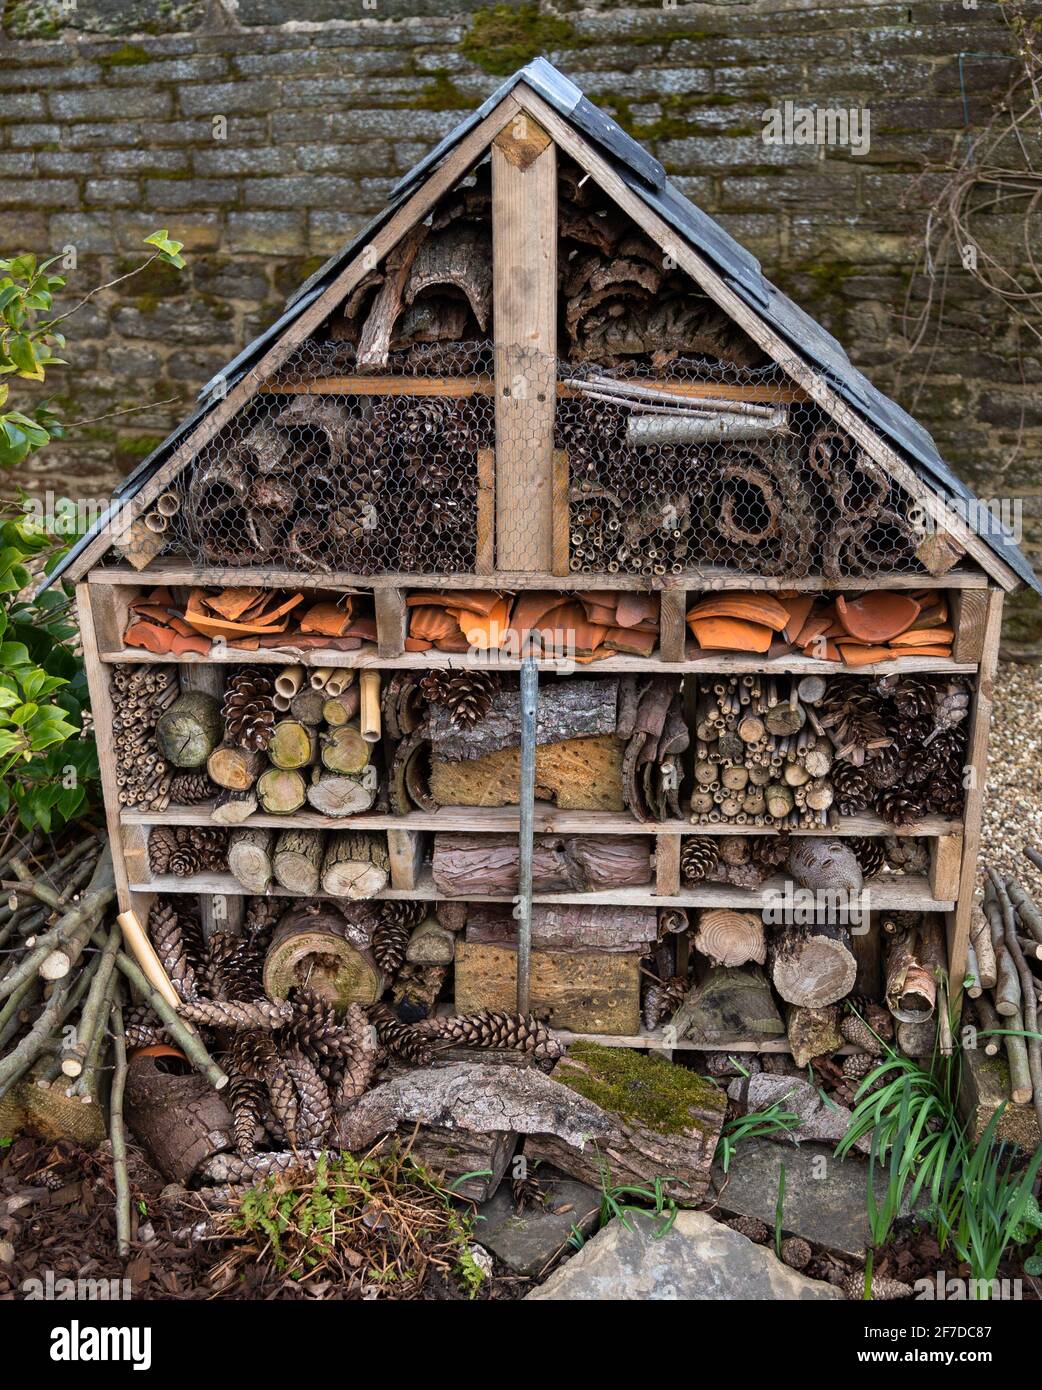 An insect house built to provide homes for bugs and mini beasts. Stock Photo